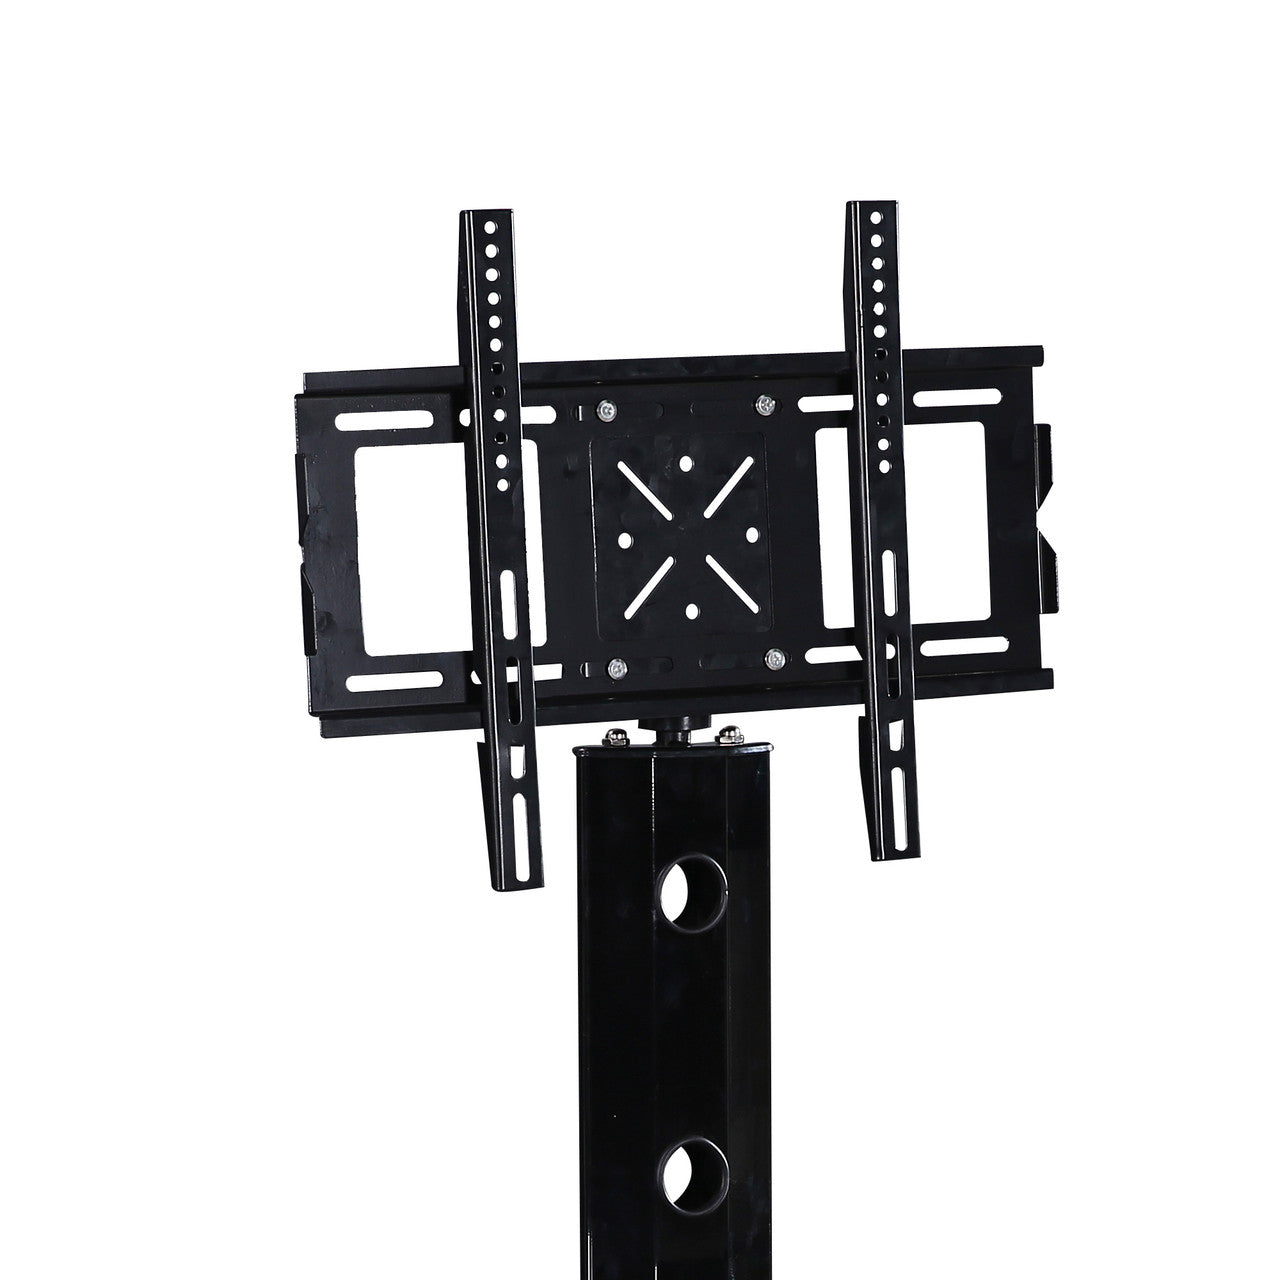 Go Green Woods Ella Swivel Mount Black Glass TV Stand for up to 55-inch TV